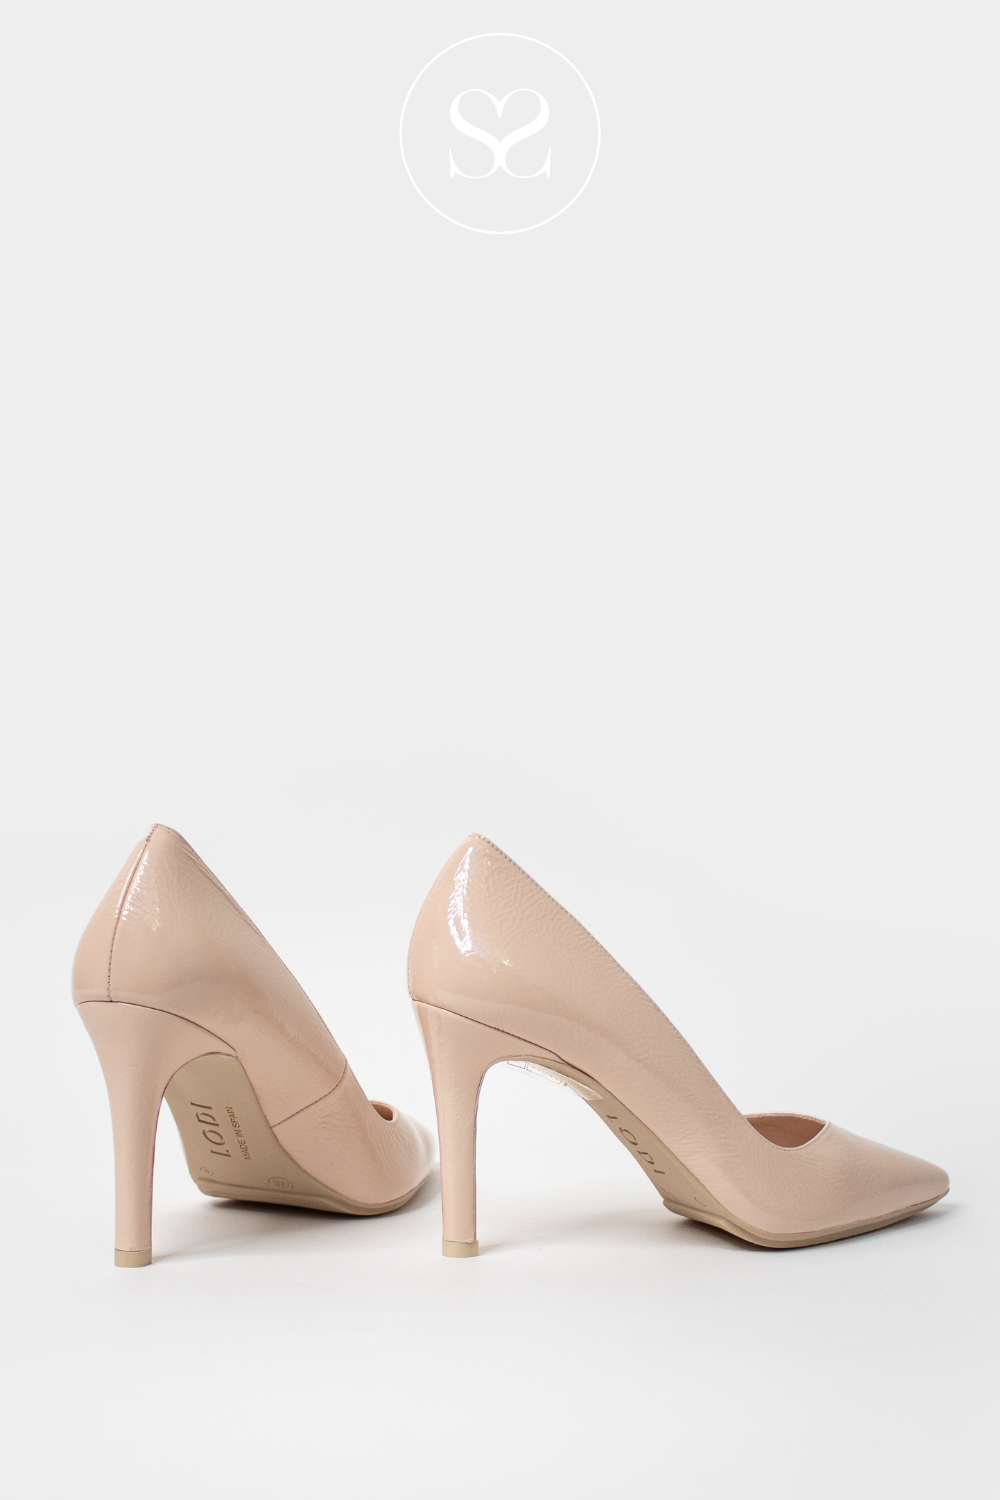 LODI RABOT NUDE PATENT POINTED TOE COURT HIGH HEEL SHOE